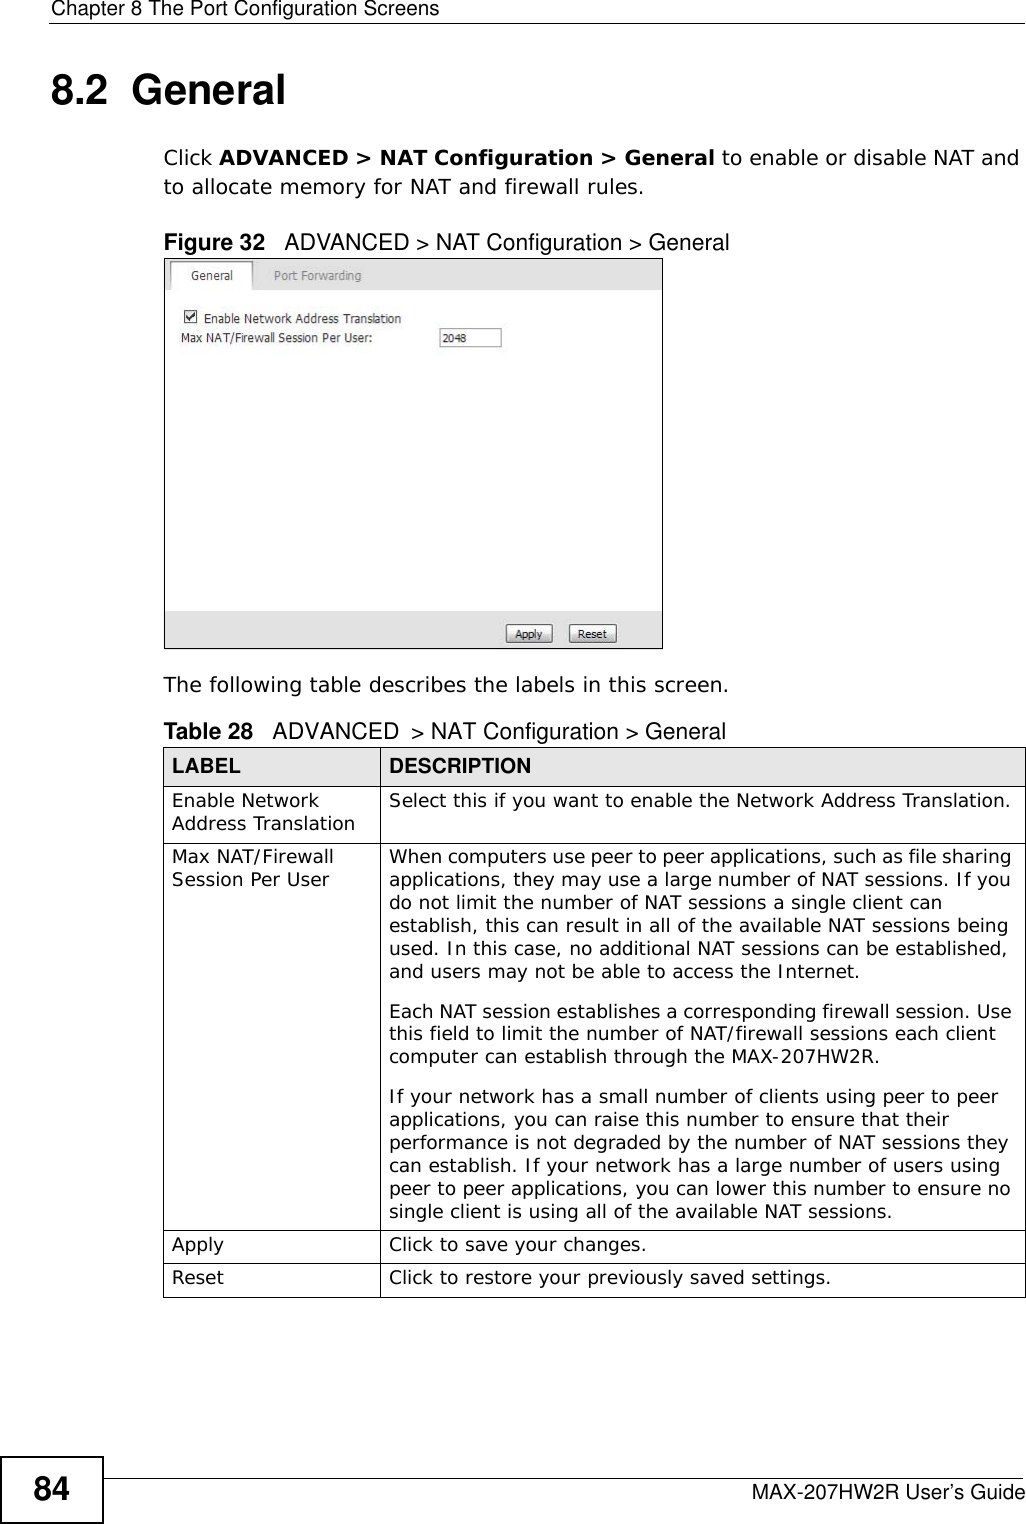 Chapter 8 The Port Configuration ScreensMAX-207HW2R User’s Guide848.2  GeneralClick ADVANCED &gt; NAT Configuration &gt; General to enable or disable NAT and to allocate memory for NAT and firewall rules.Figure 32   ADVANCED &gt; NAT Configuration &gt; GeneralThe following table describes the labels in this screen.Table 28   ADVANCED &gt; NAT Configuration &gt; GeneralLABEL DESCRIPTIONEnable Network Address Translation Select this if you want to enable the Network Address Translation.Max NAT/Firewall Session Per User When computers use peer to peer applications, such as file sharing applications, they may use a large number of NAT sessions. If you do not limit the number of NAT sessions a single client can establish, this can result in all of the available NAT sessions being used. In this case, no additional NAT sessions can be established, and users may not be able to access the Internet. Each NAT session establishes a corresponding firewall session. Use this field to limit the number of NAT/firewall sessions each client computer can establish through the MAX-207HW2R. If your network has a small number of clients using peer to peer applications, you can raise this number to ensure that their performance is not degraded by the number of NAT sessions they can establish. If your network has a large number of users using peer to peer applications, you can lower this number to ensure no single client is using all of the available NAT sessions. Apply Click to save your changes.Reset Click to restore your previously saved settings.